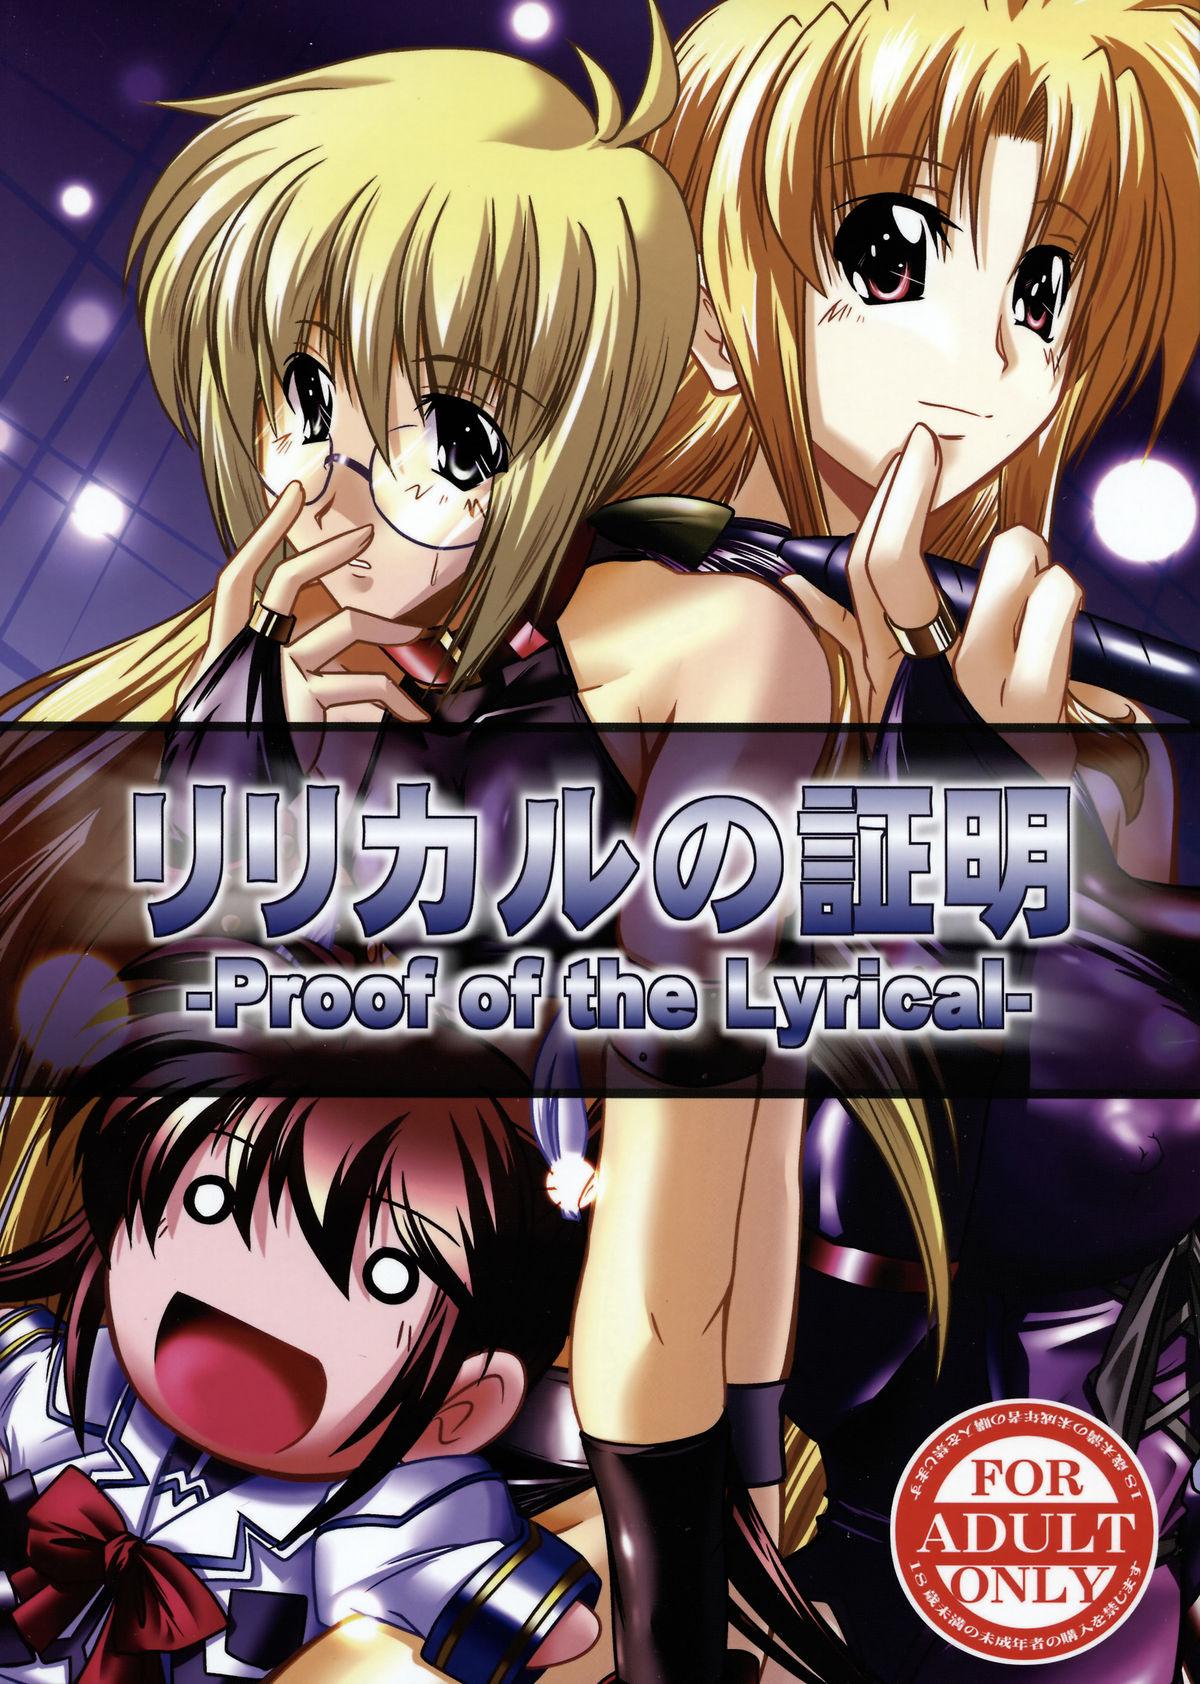 Chat Lyrical no Shoumei - Proof of the Lyrical - Mahou shoujo lyrical nanoha Best Blow Jobs Ever - Picture 1